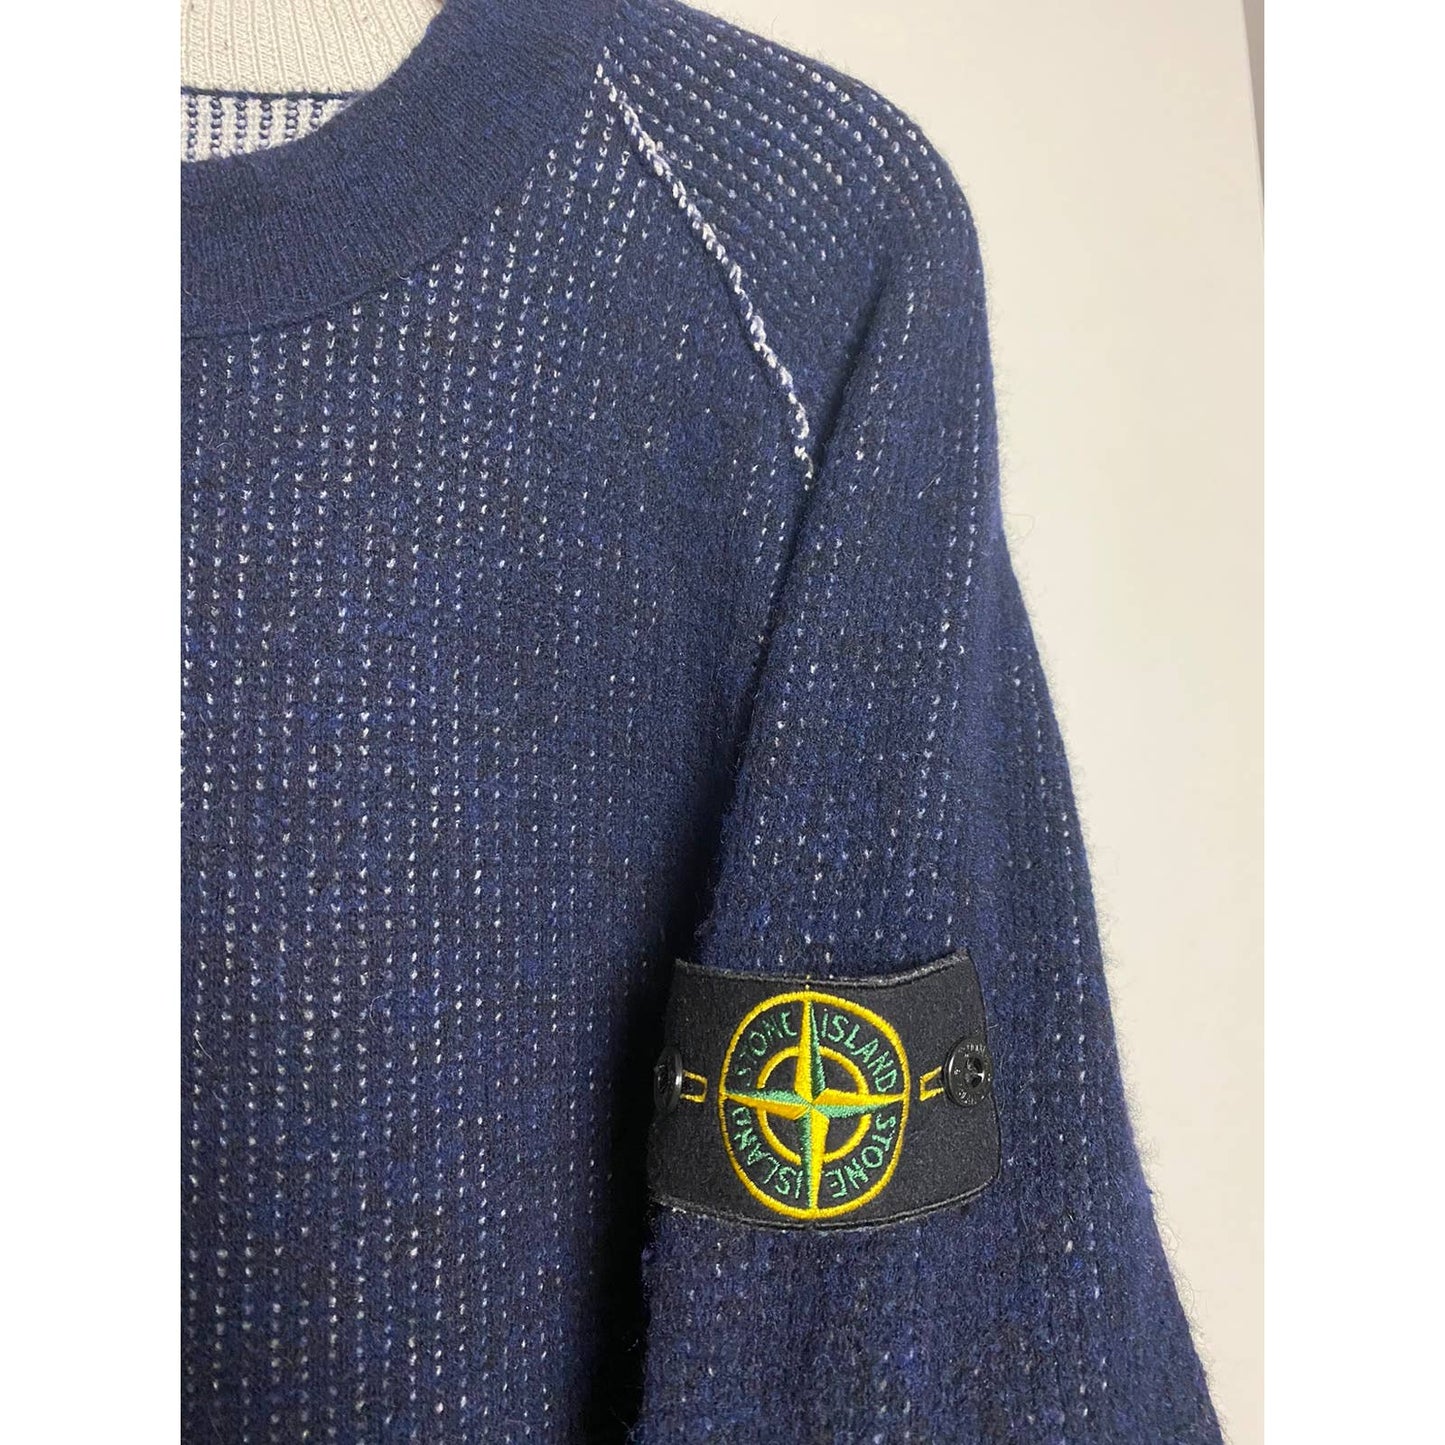 Stone Island reversible sweater grey navy with badge